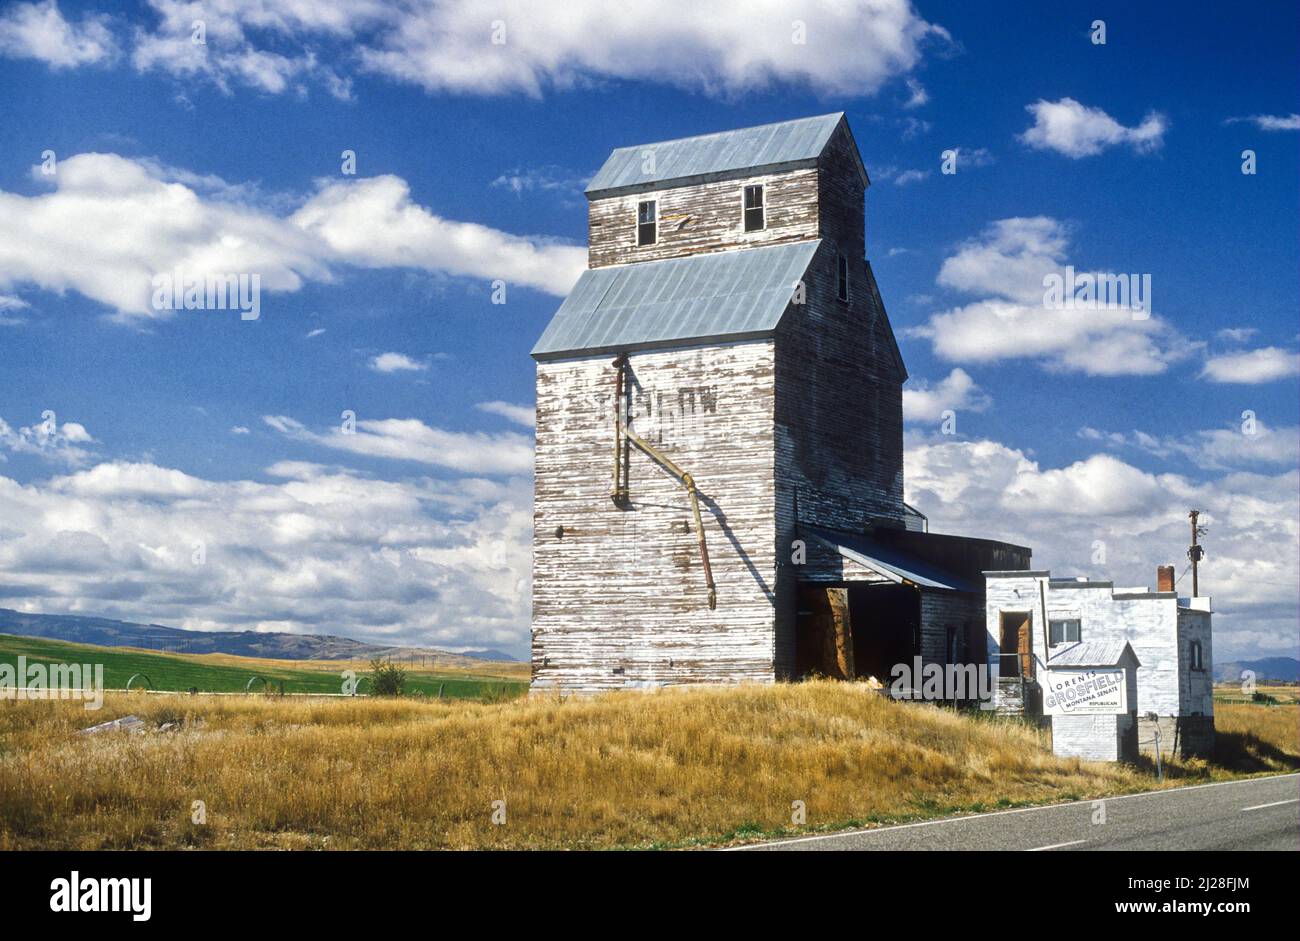 An old, wooden grain elevator in a remote area of Montana, north of Yellowstone National Park Stock Photo